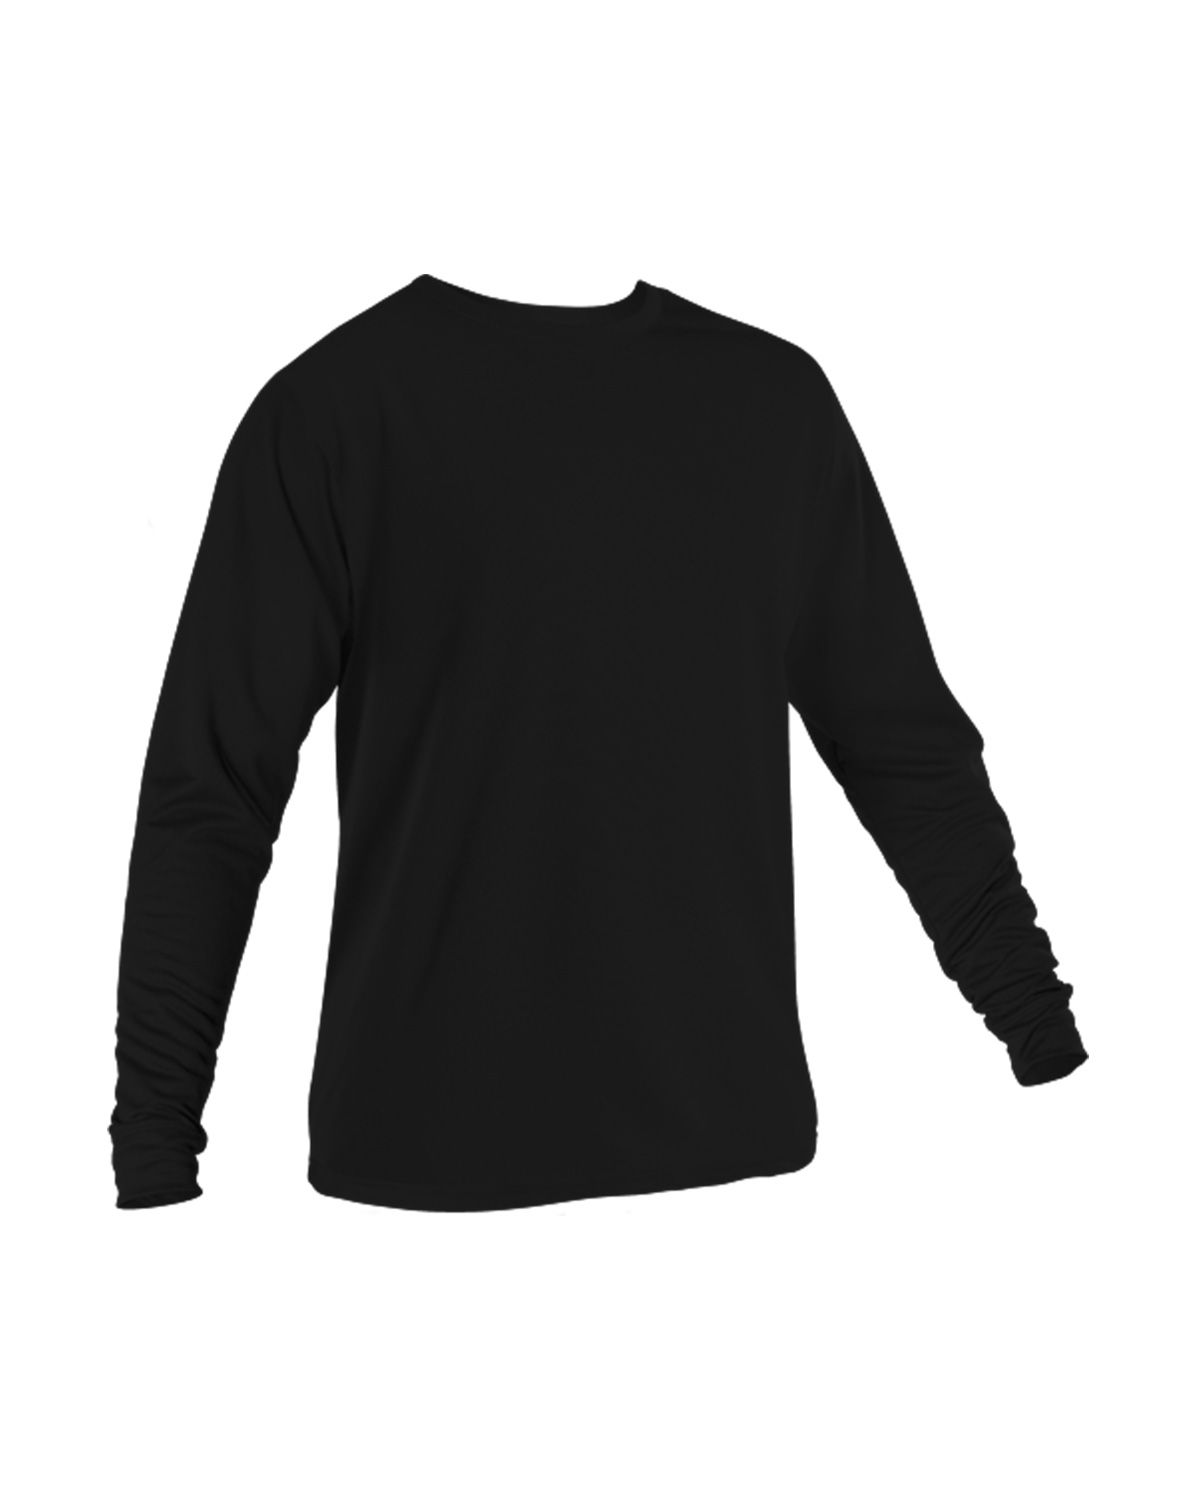 youth long sleeve soccer jersey